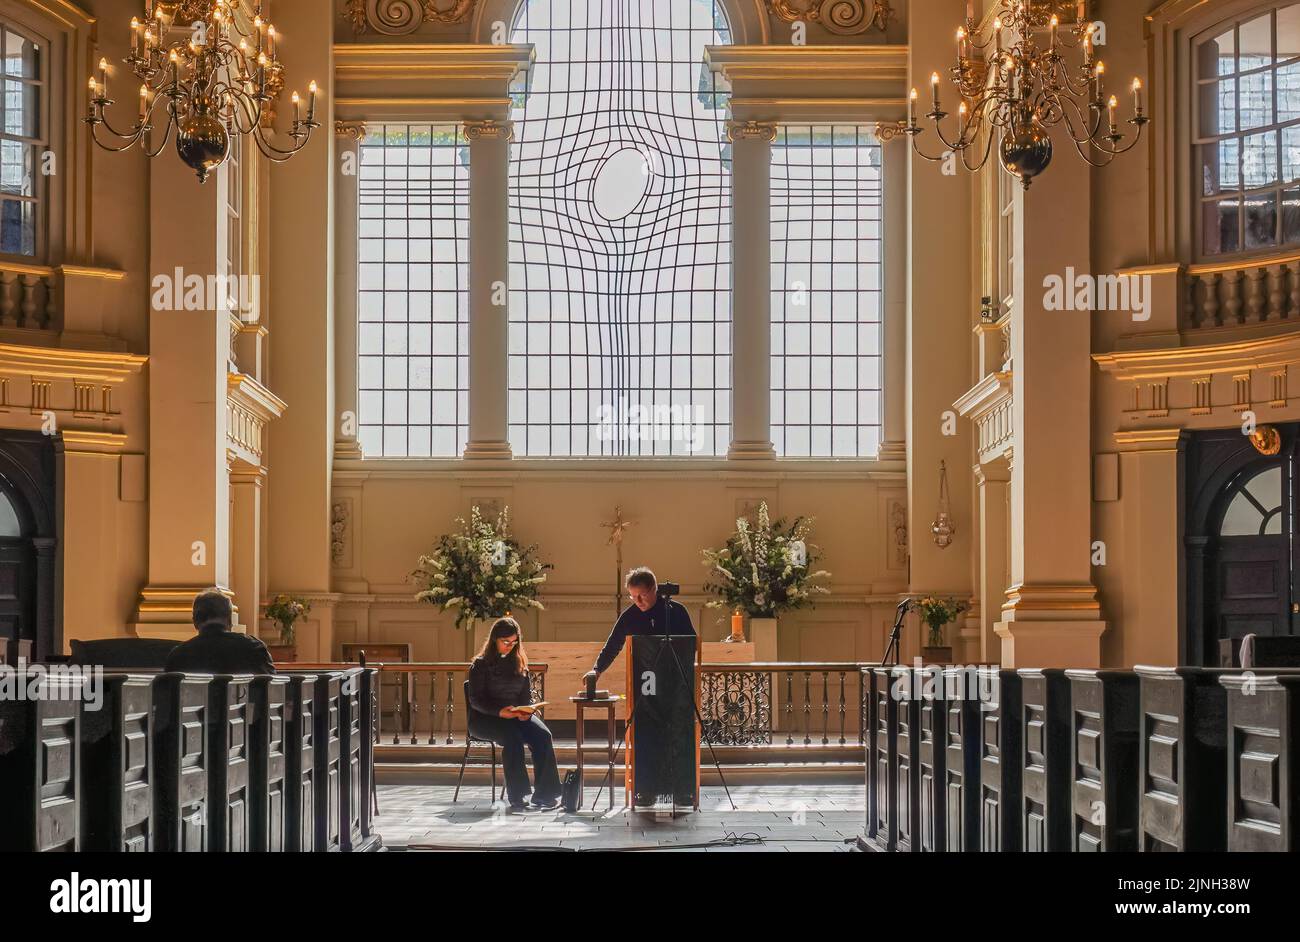 London, UK- July 4, 2022: Off Trafalgar Square. Inside St. Martin-in-the-fields church, Priests in front at chancel under window with smartly designed Stock Photo